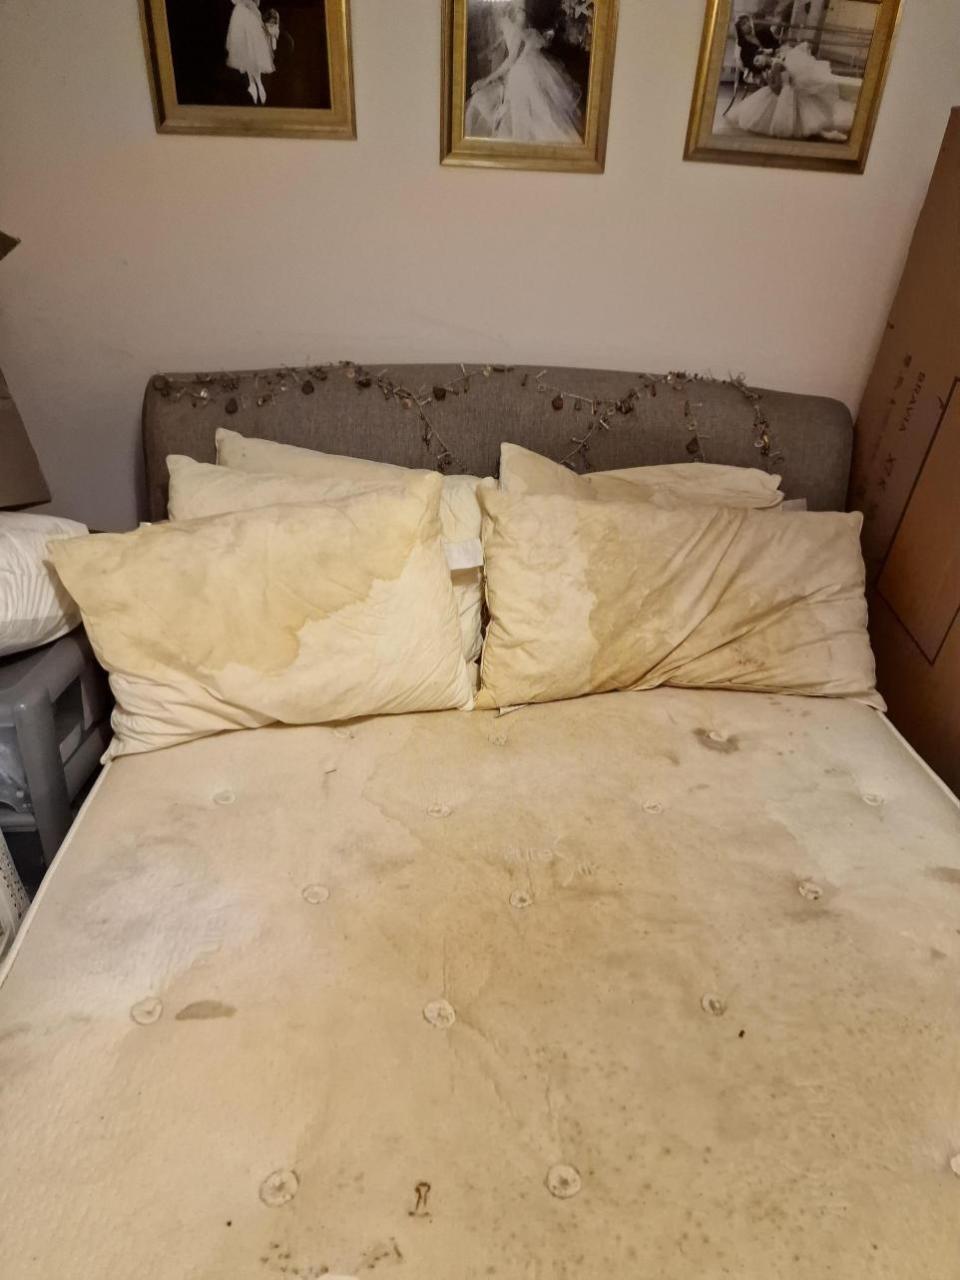 Stourbridge News: The bedroom which Rae Boxley says she can no longer sleep in due to the mouldy conditions